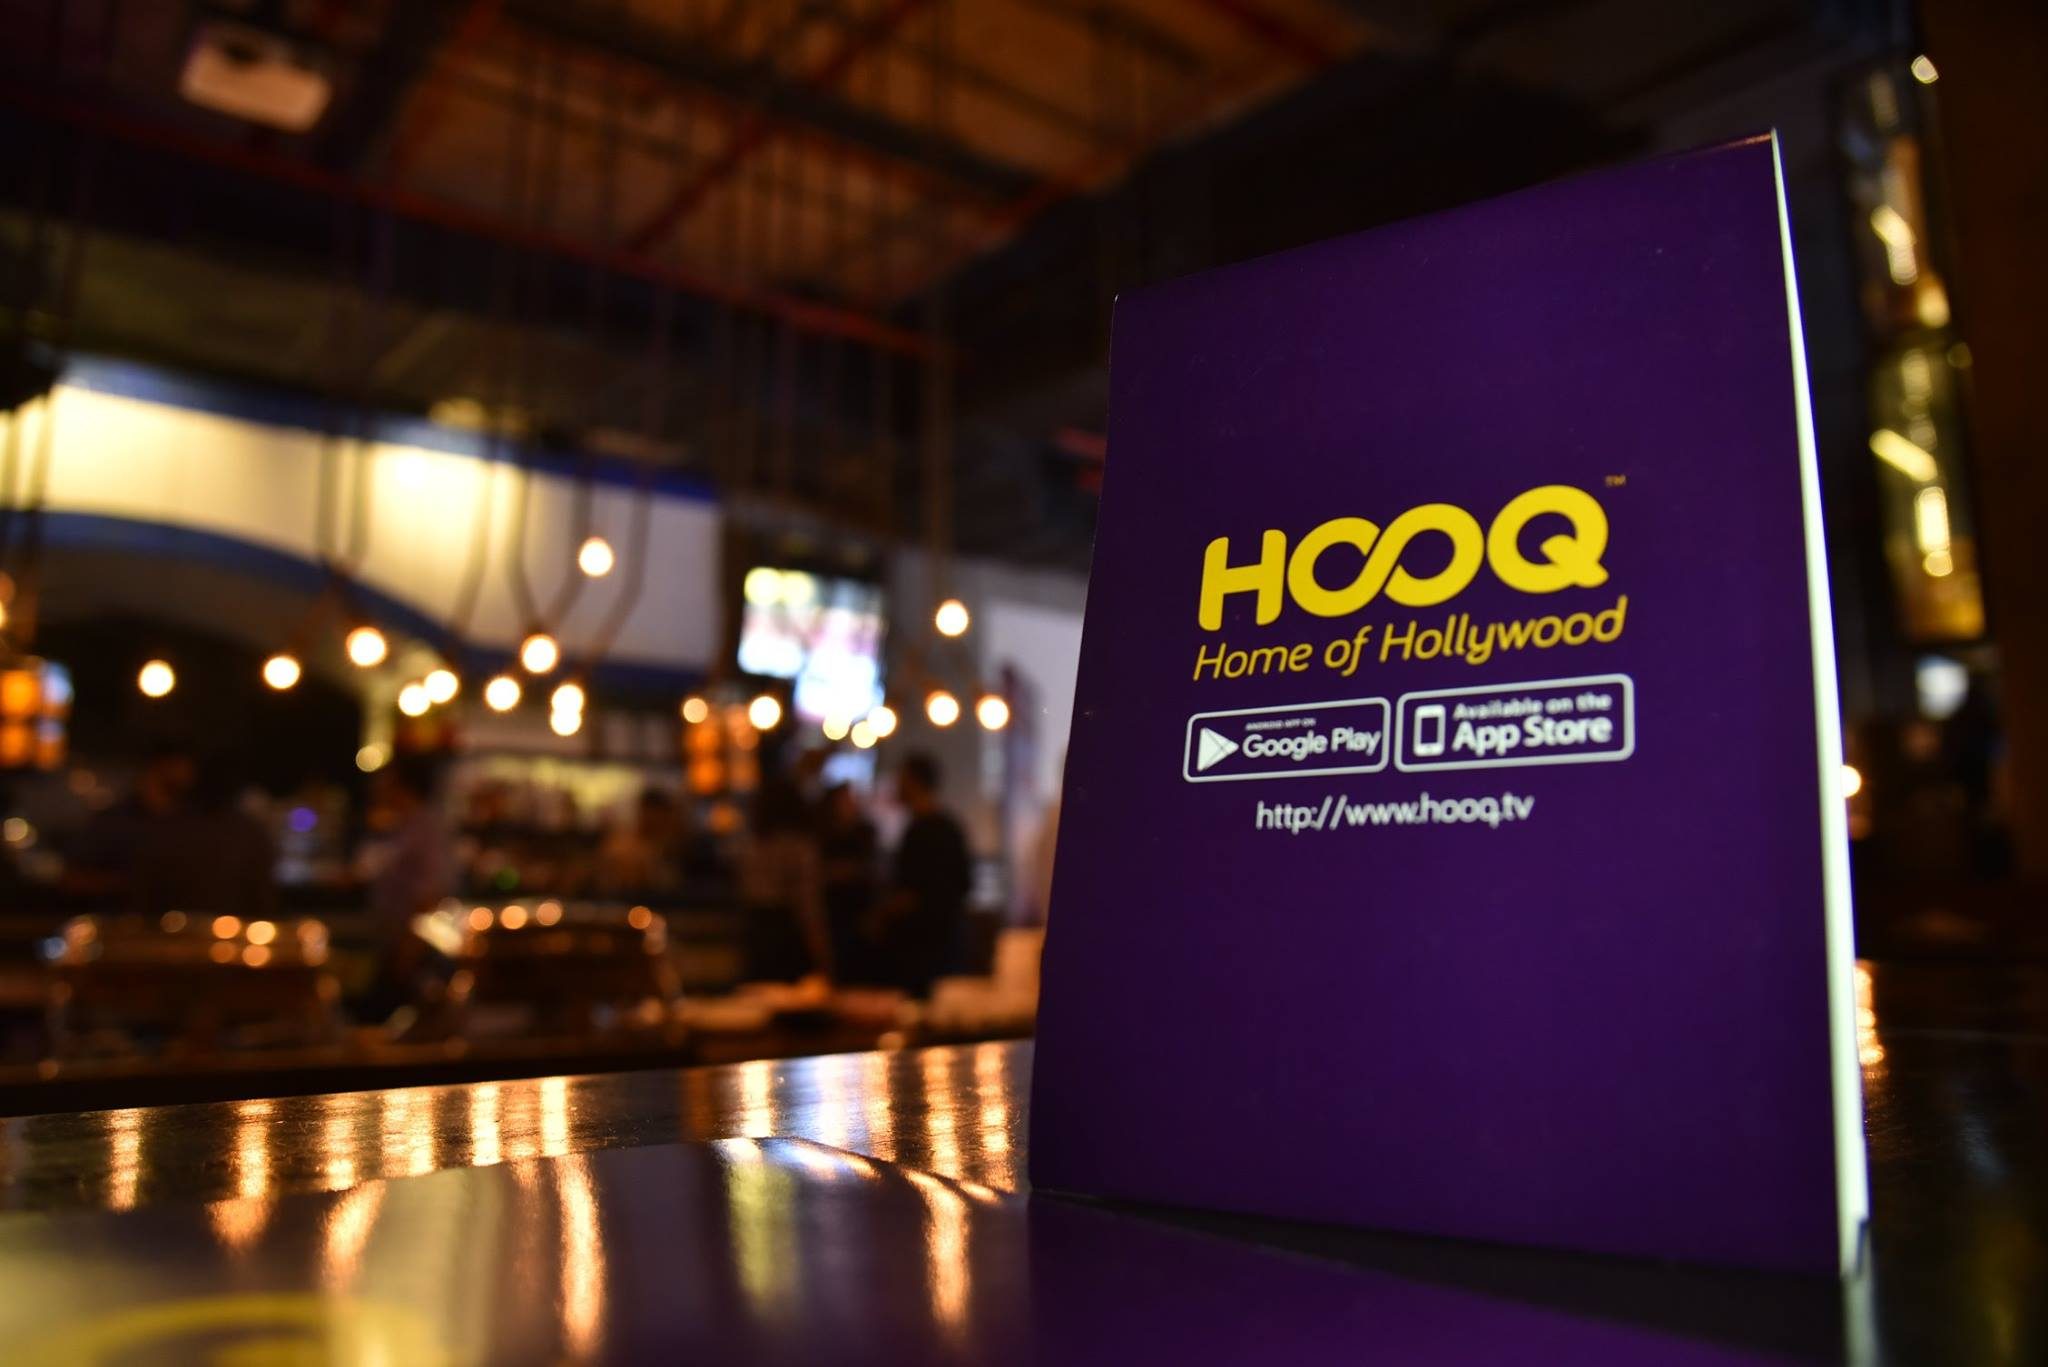 Video-on-demand service provider HOOQ to roll out content on Grab Singapore app